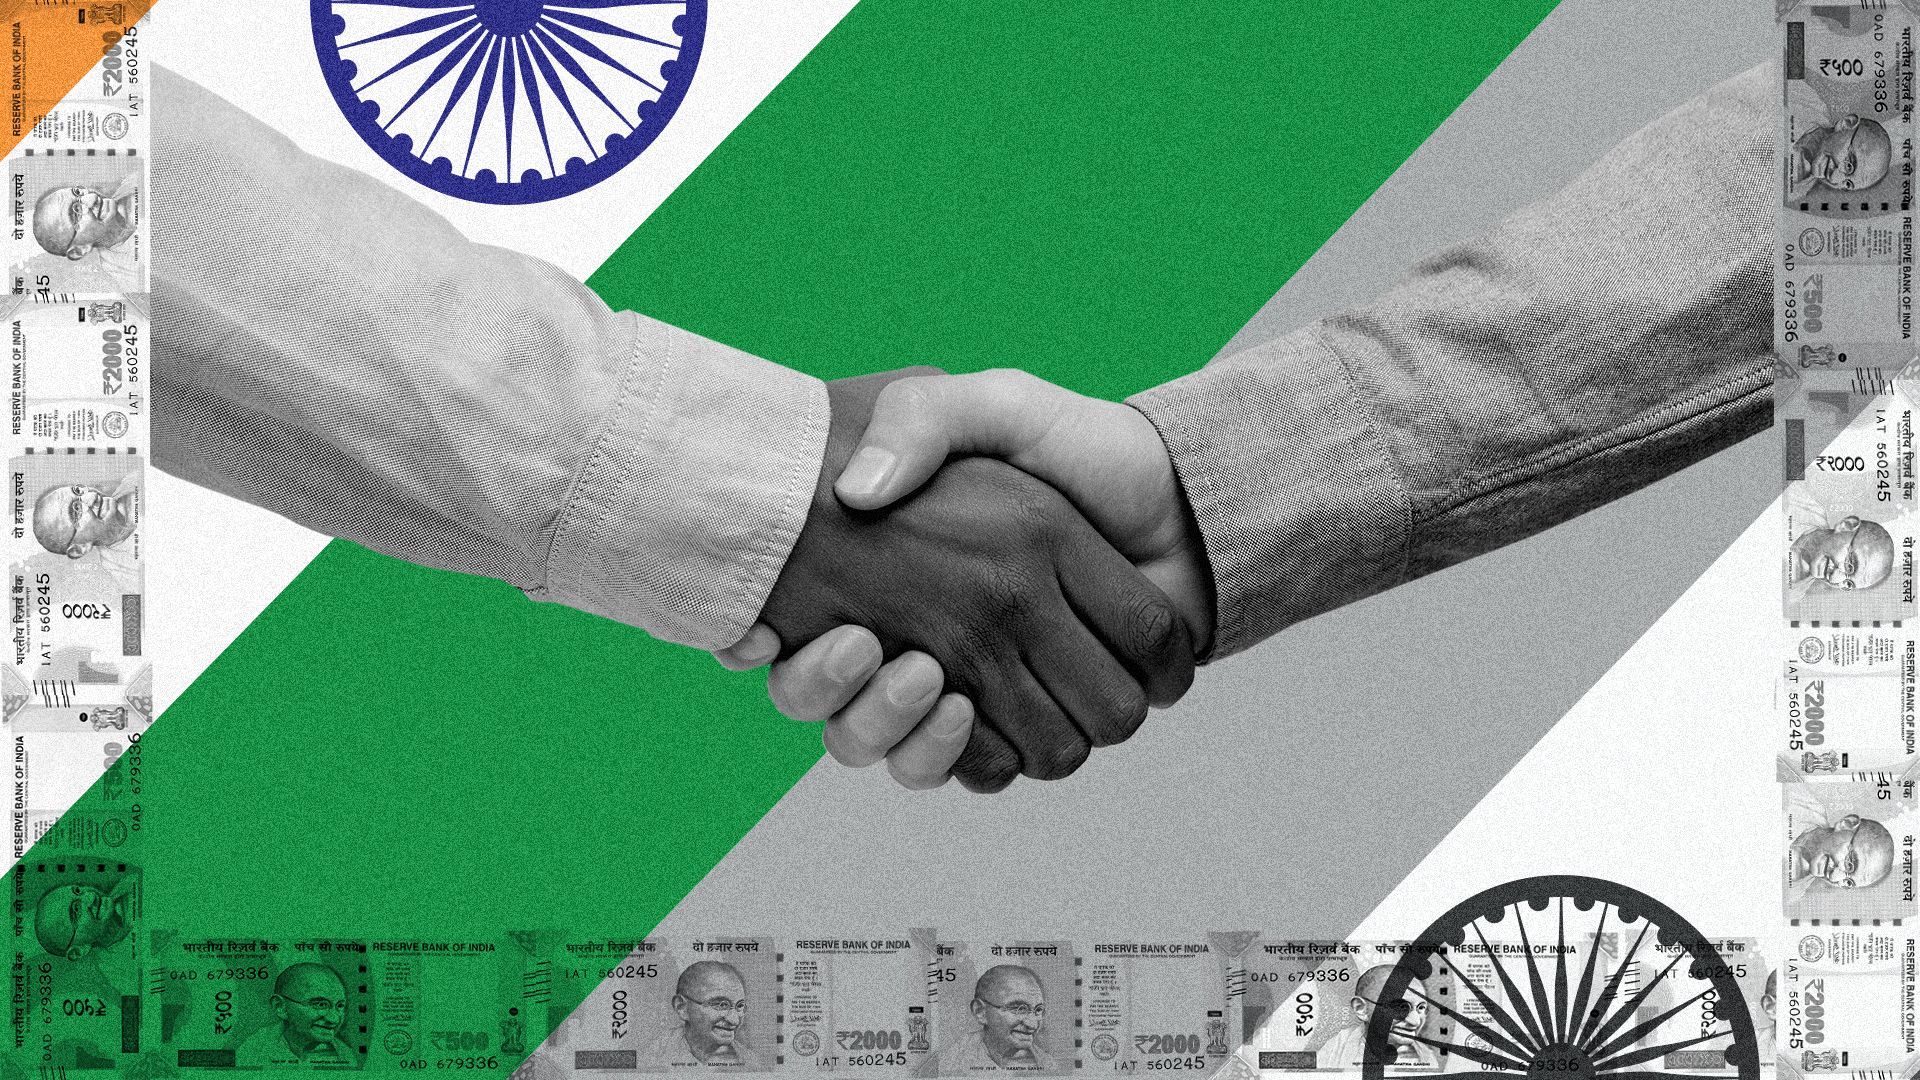 Illustration of a handshake between two people in front of a background designed with a graphic Indian flag pattern, surrounded by an Indian rupee border.